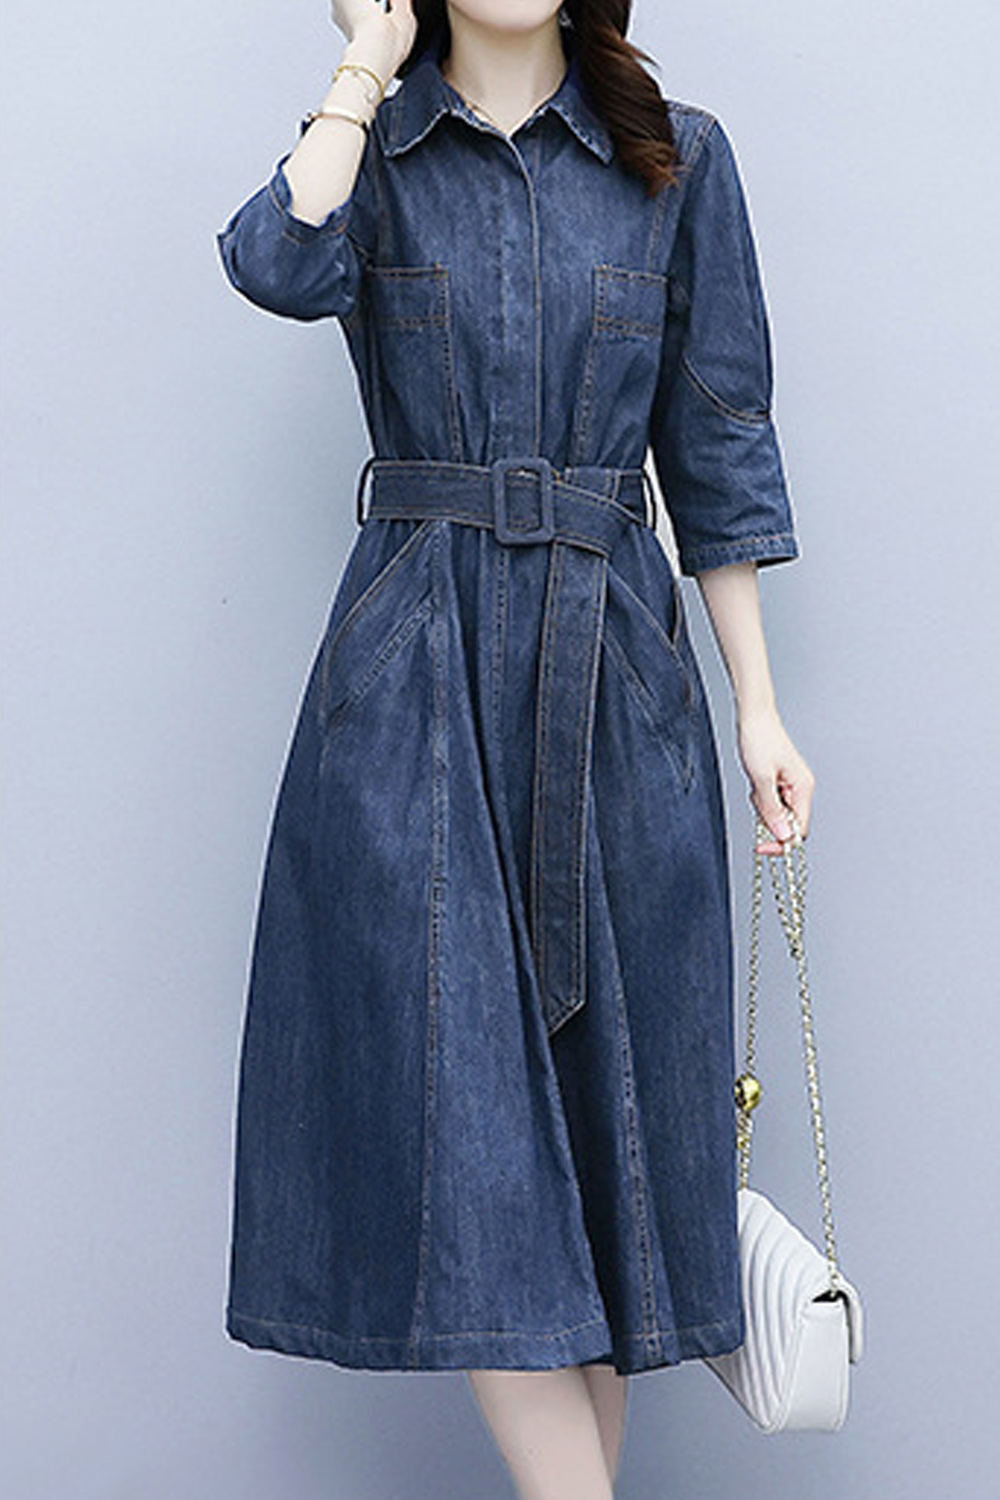 Unomatch Women Stylish Collar Short Sleeve Awesome Solid Colored Mid-Length  Autumn Casual Denim Dress